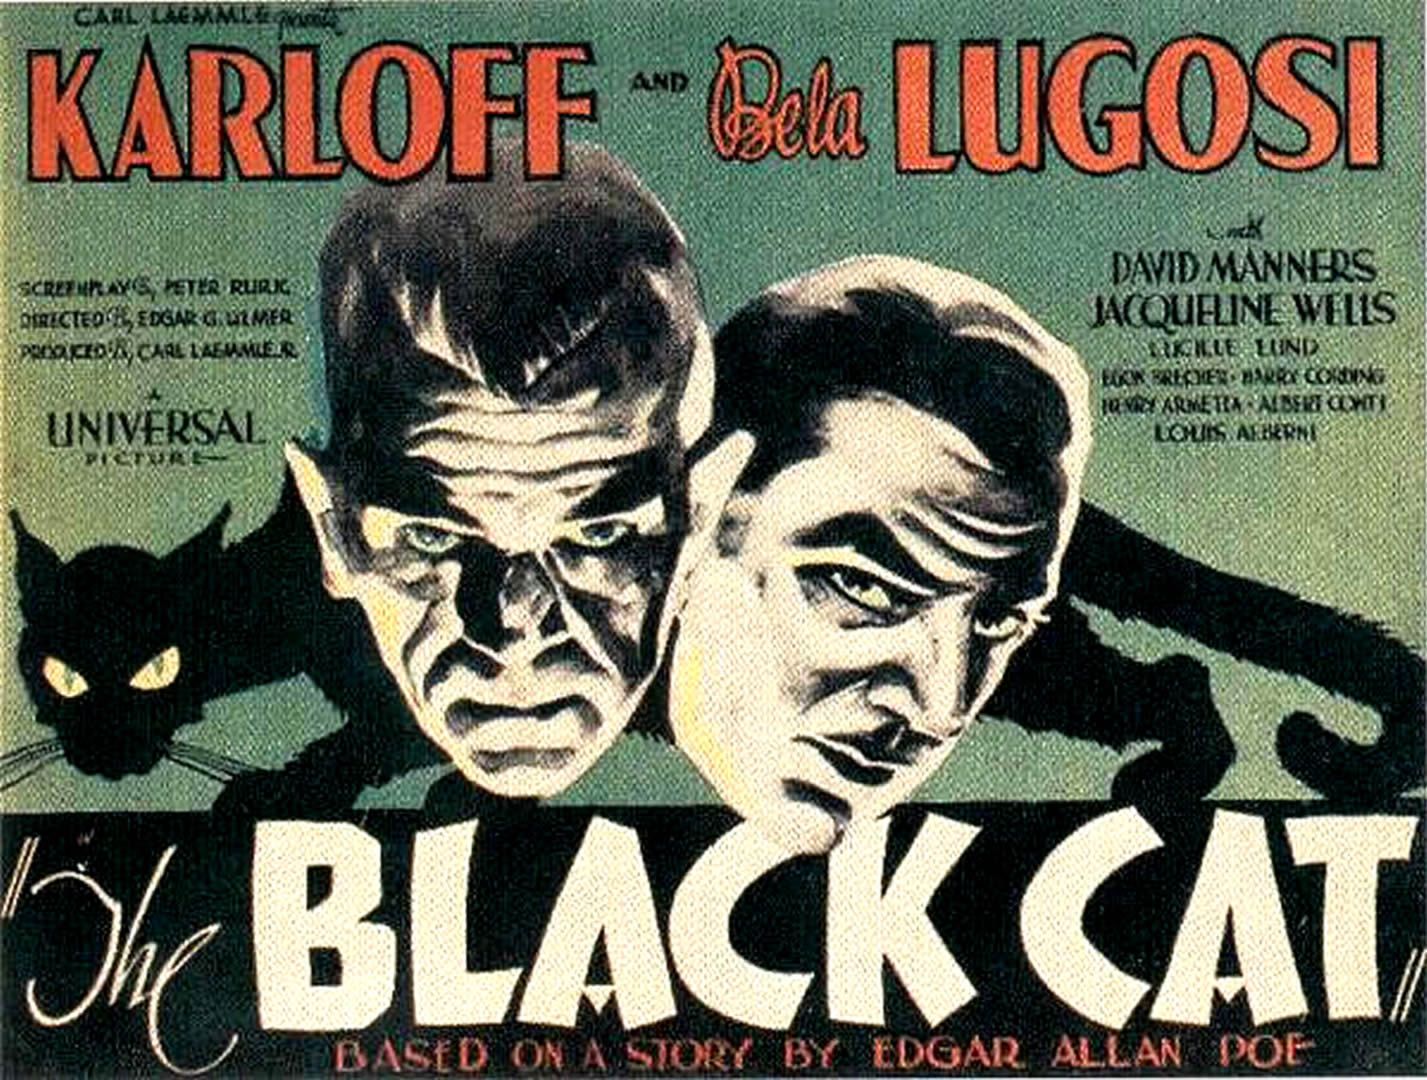 THE BLACK CAT 34 2 1940s Movie Posters